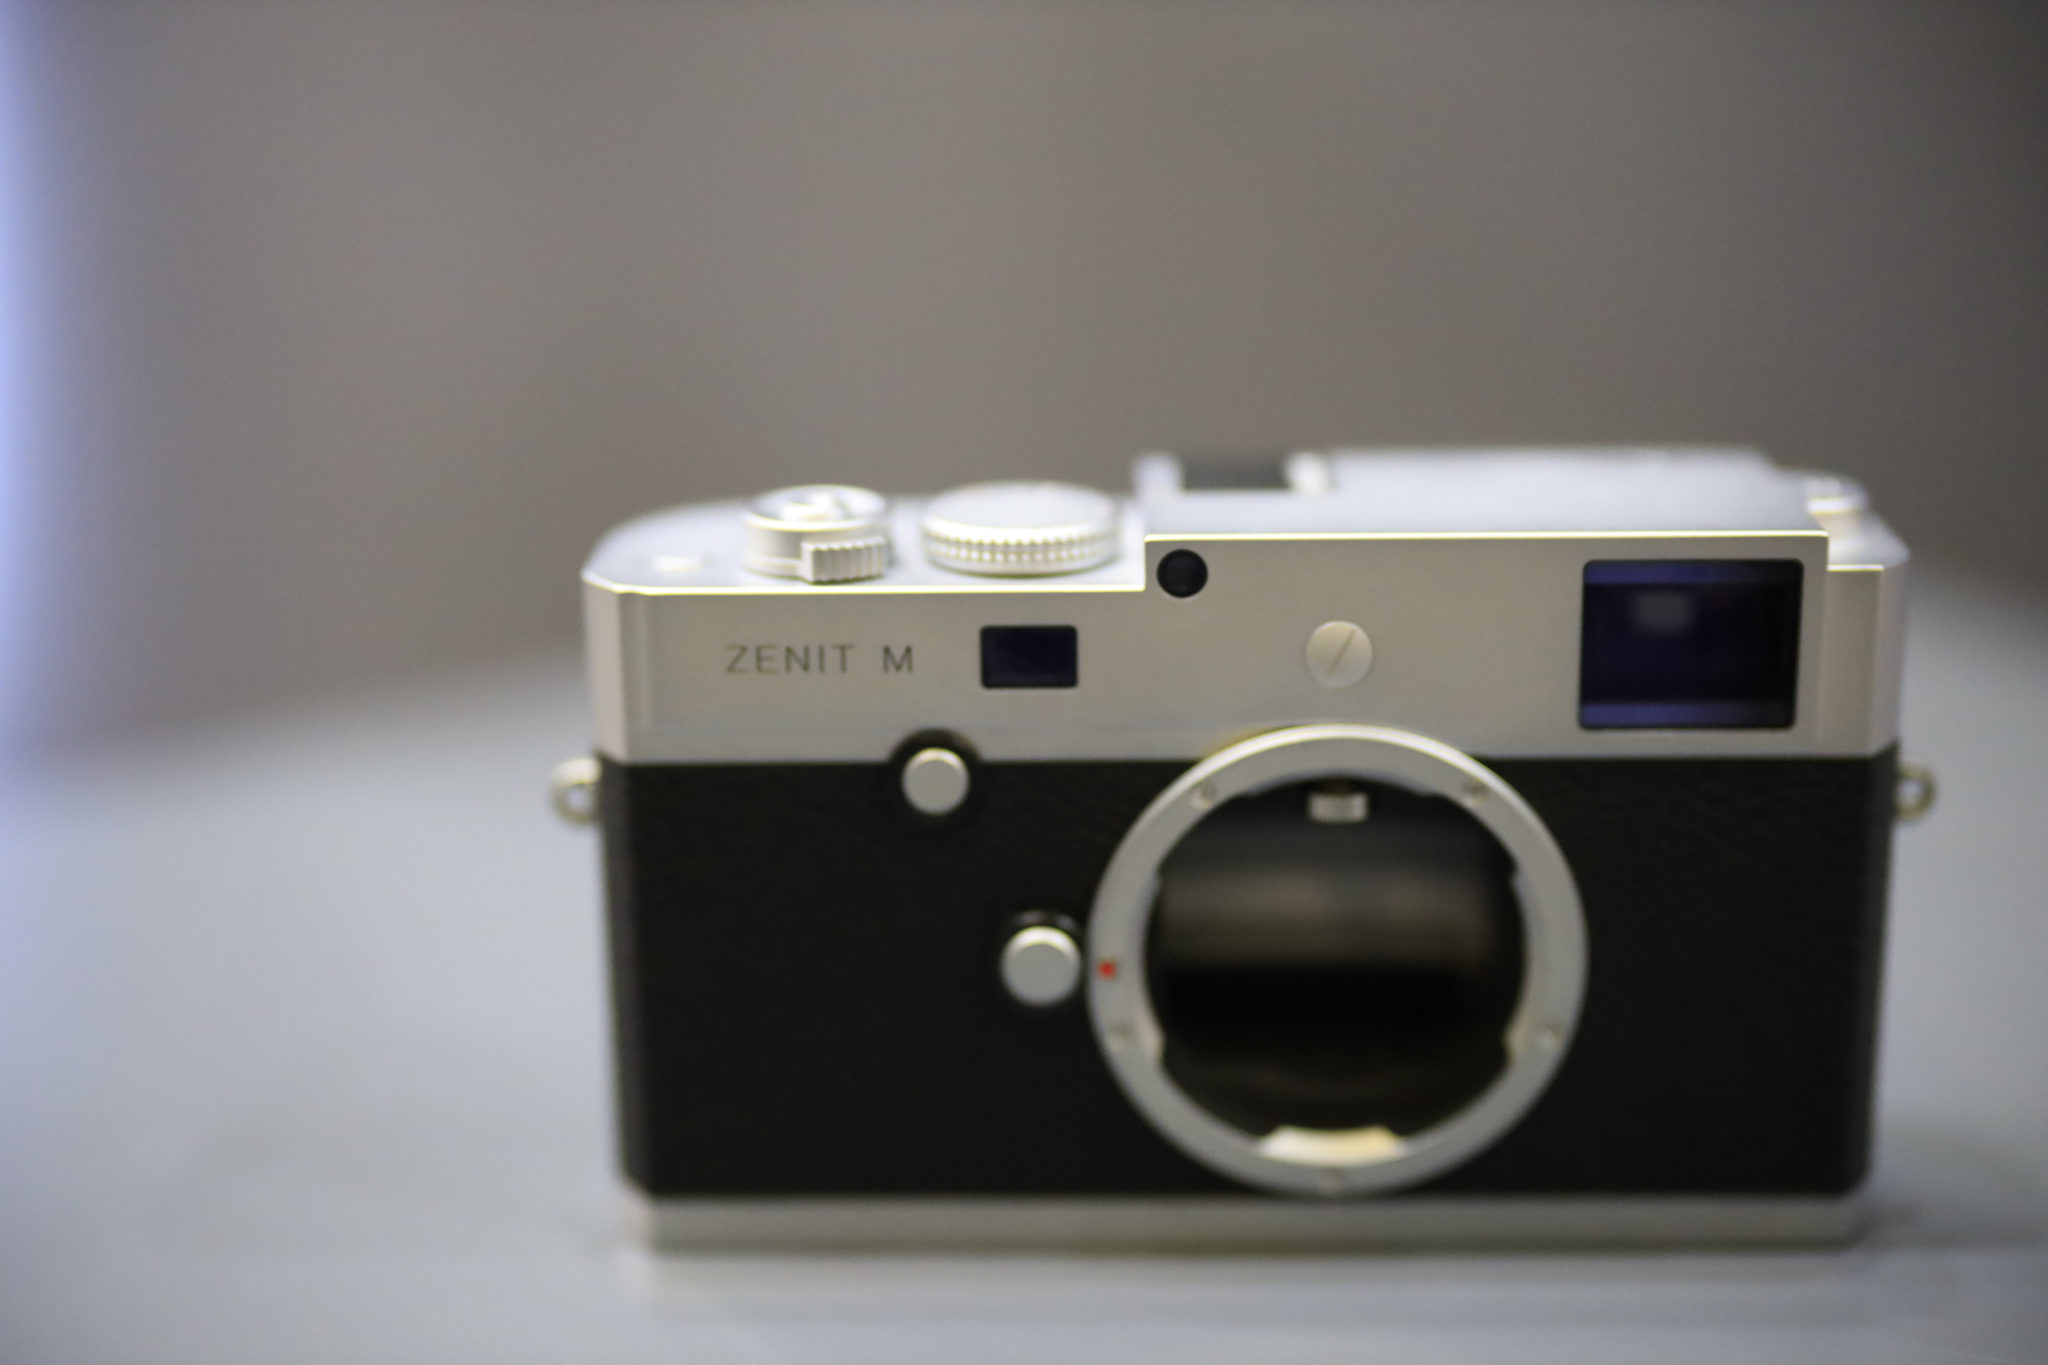 Chris Gampat The Phoblographer Zenit M Digital Camera First impressions review product images 5